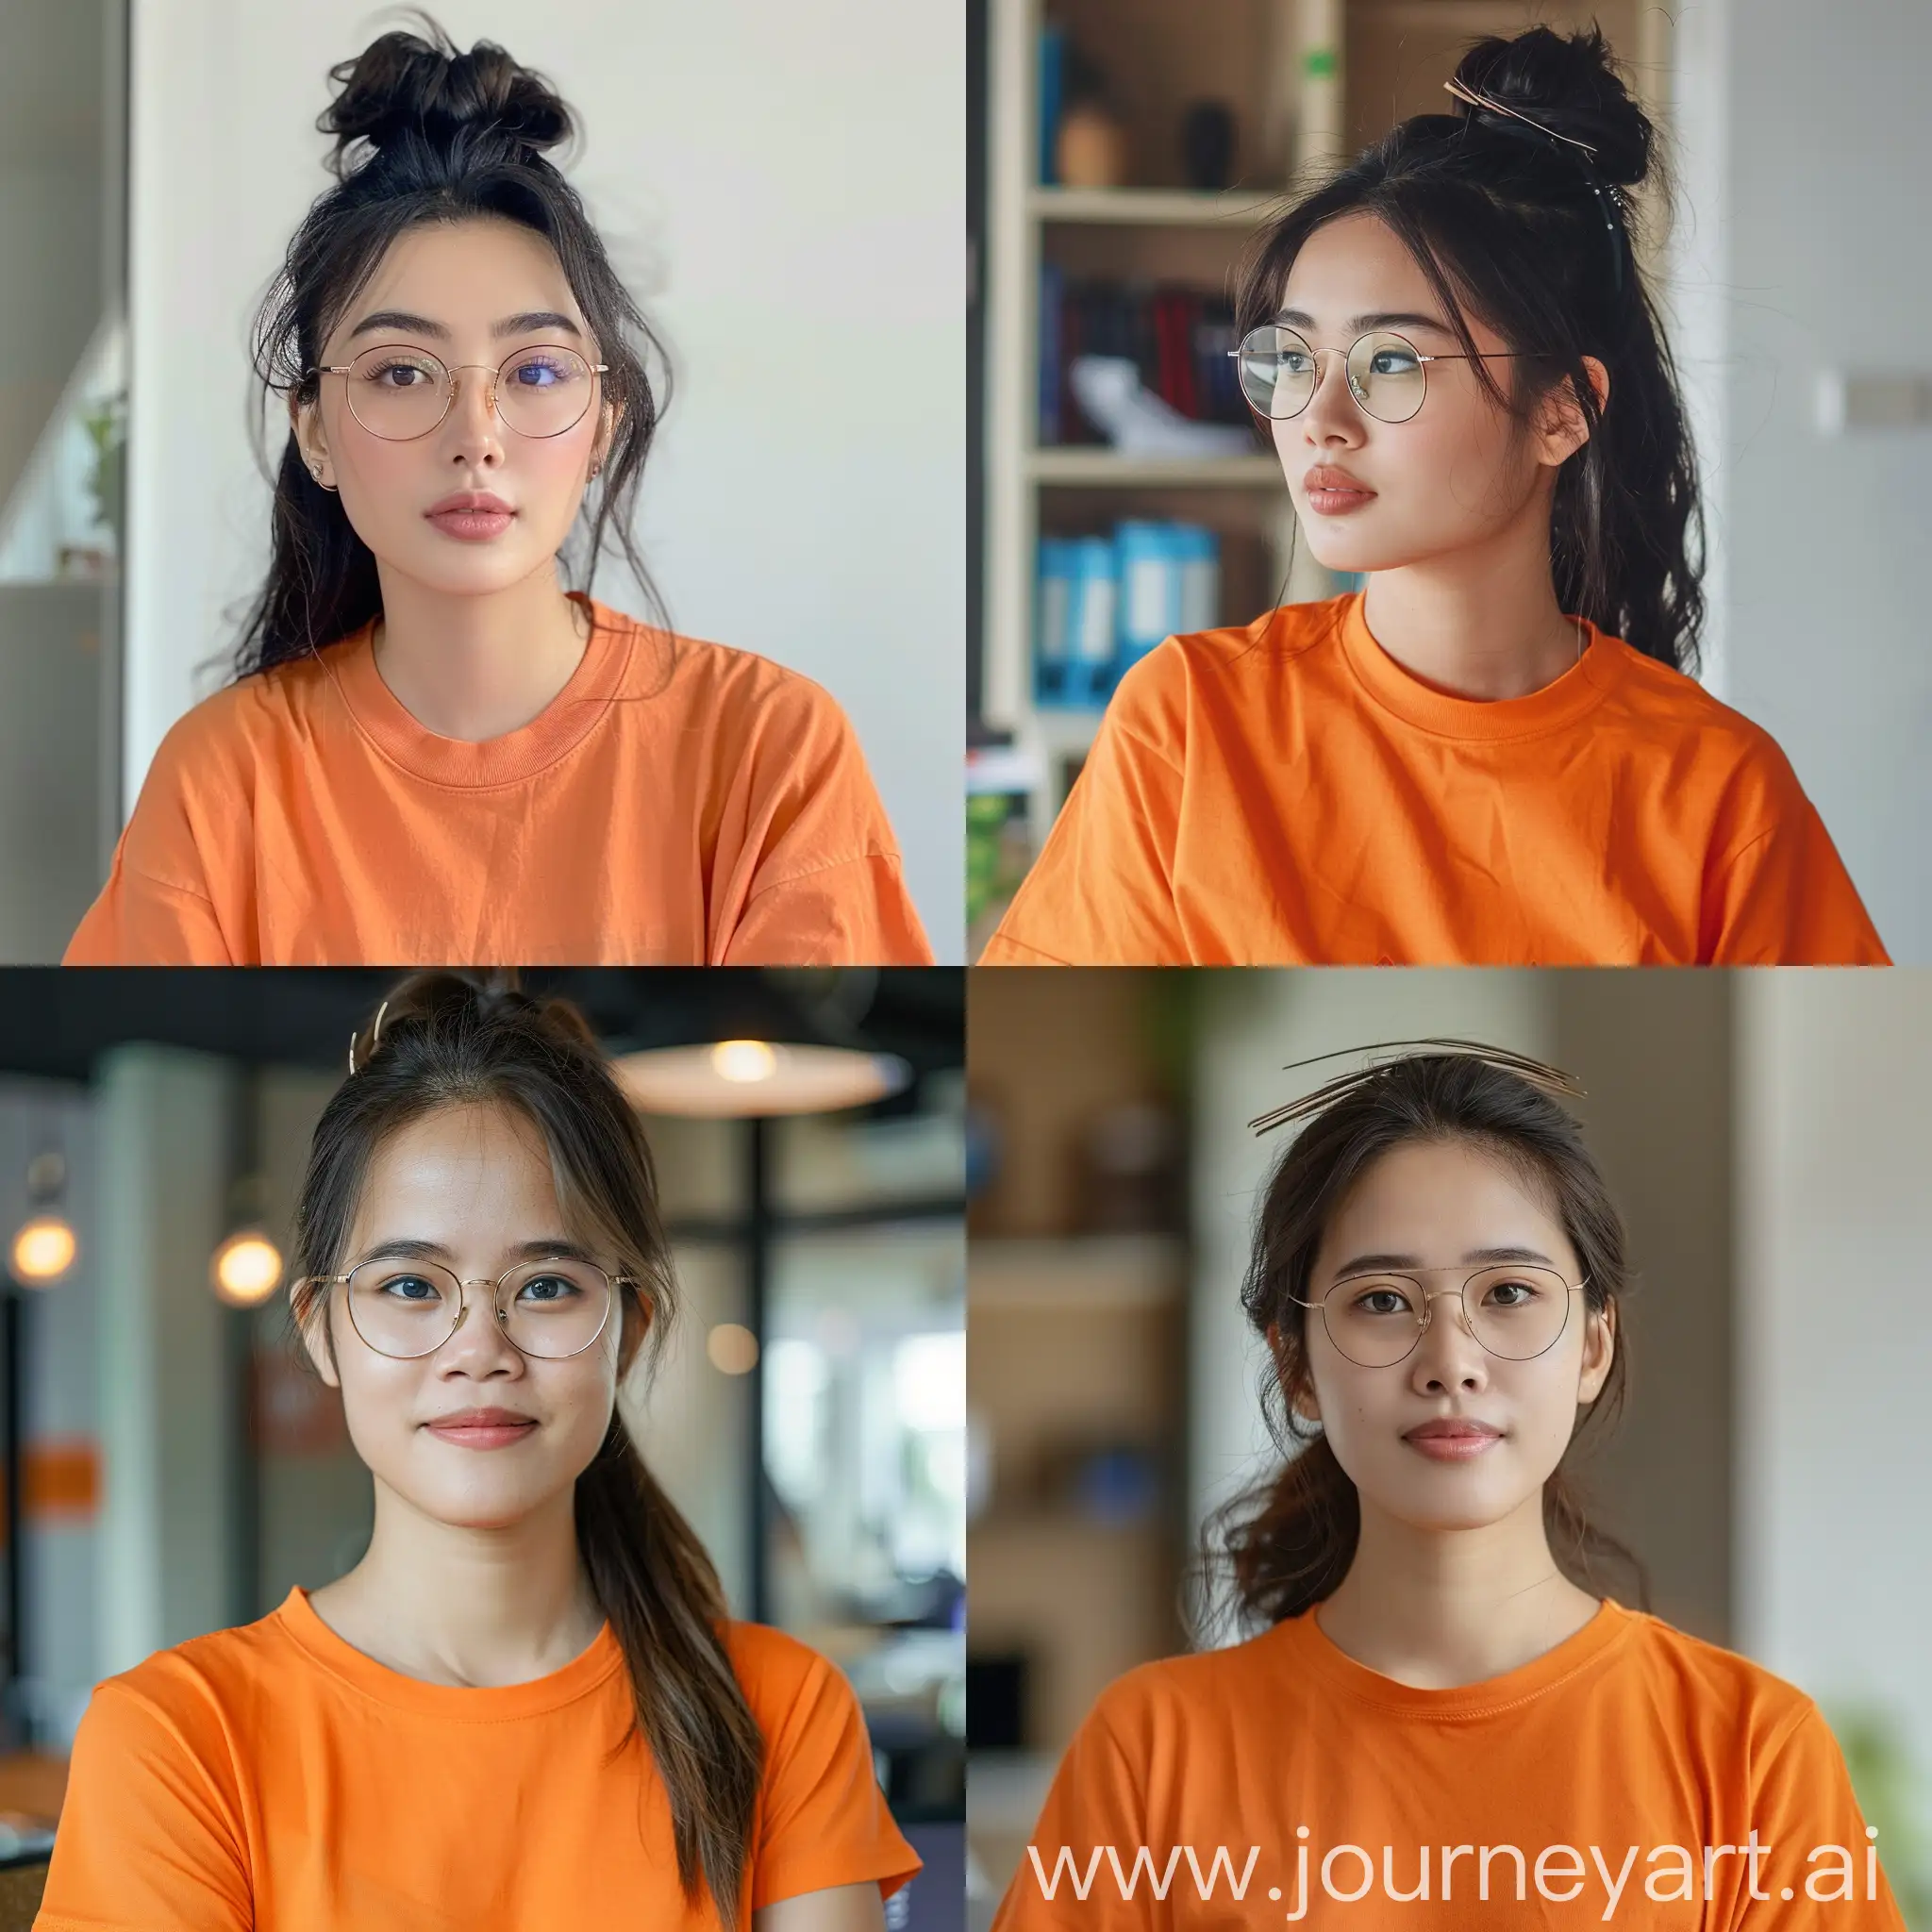 /imagine Vietnamese woman , working on office, hairclip style , little eyes with glasse T-shirt orange color, 30 year old